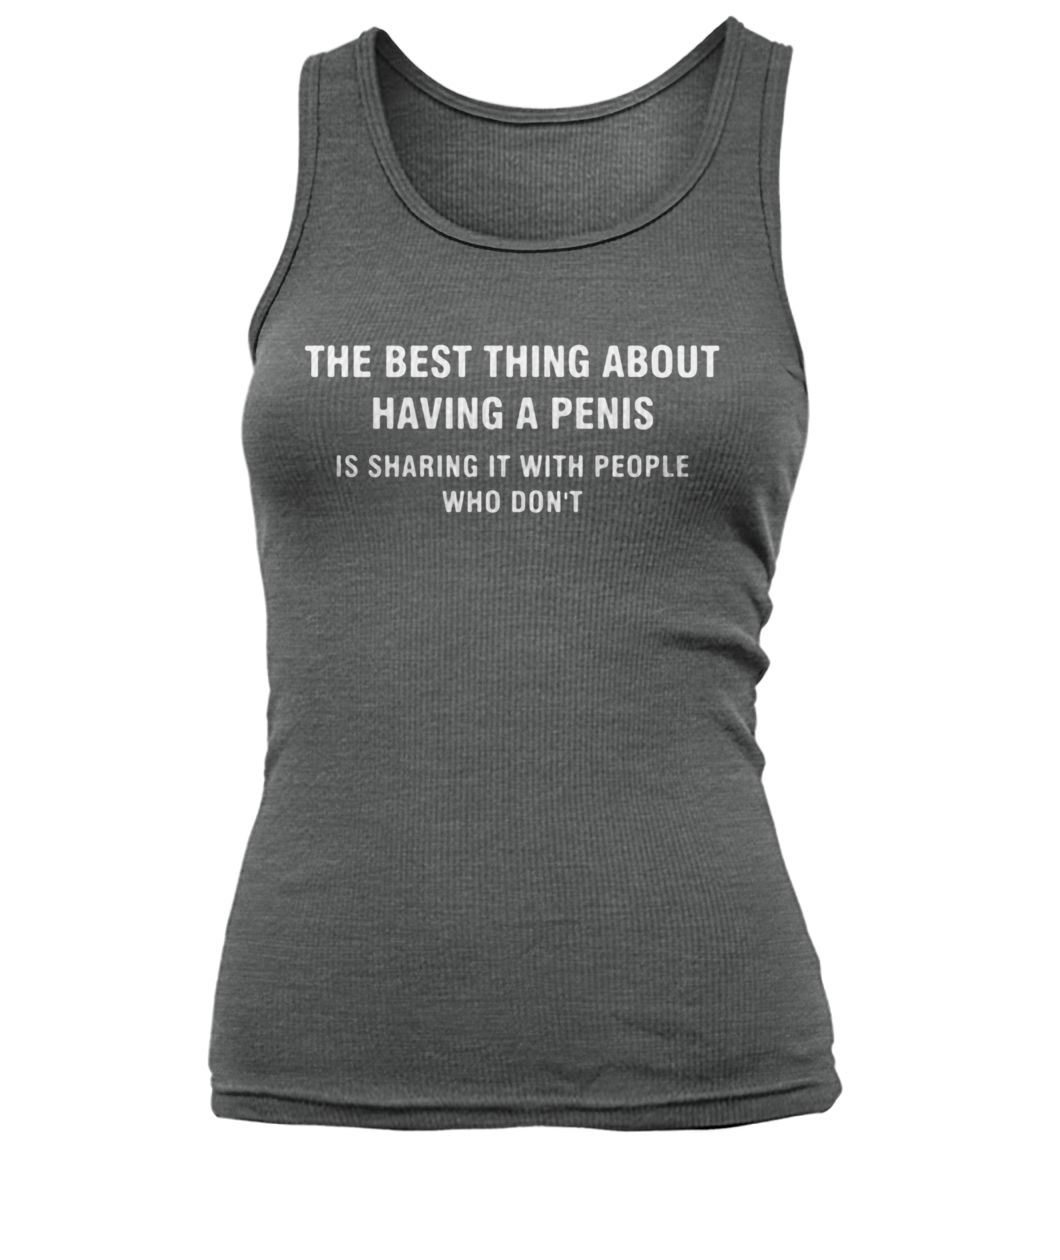 The best thing about having a penis is sharing it with people who don't women's tank top